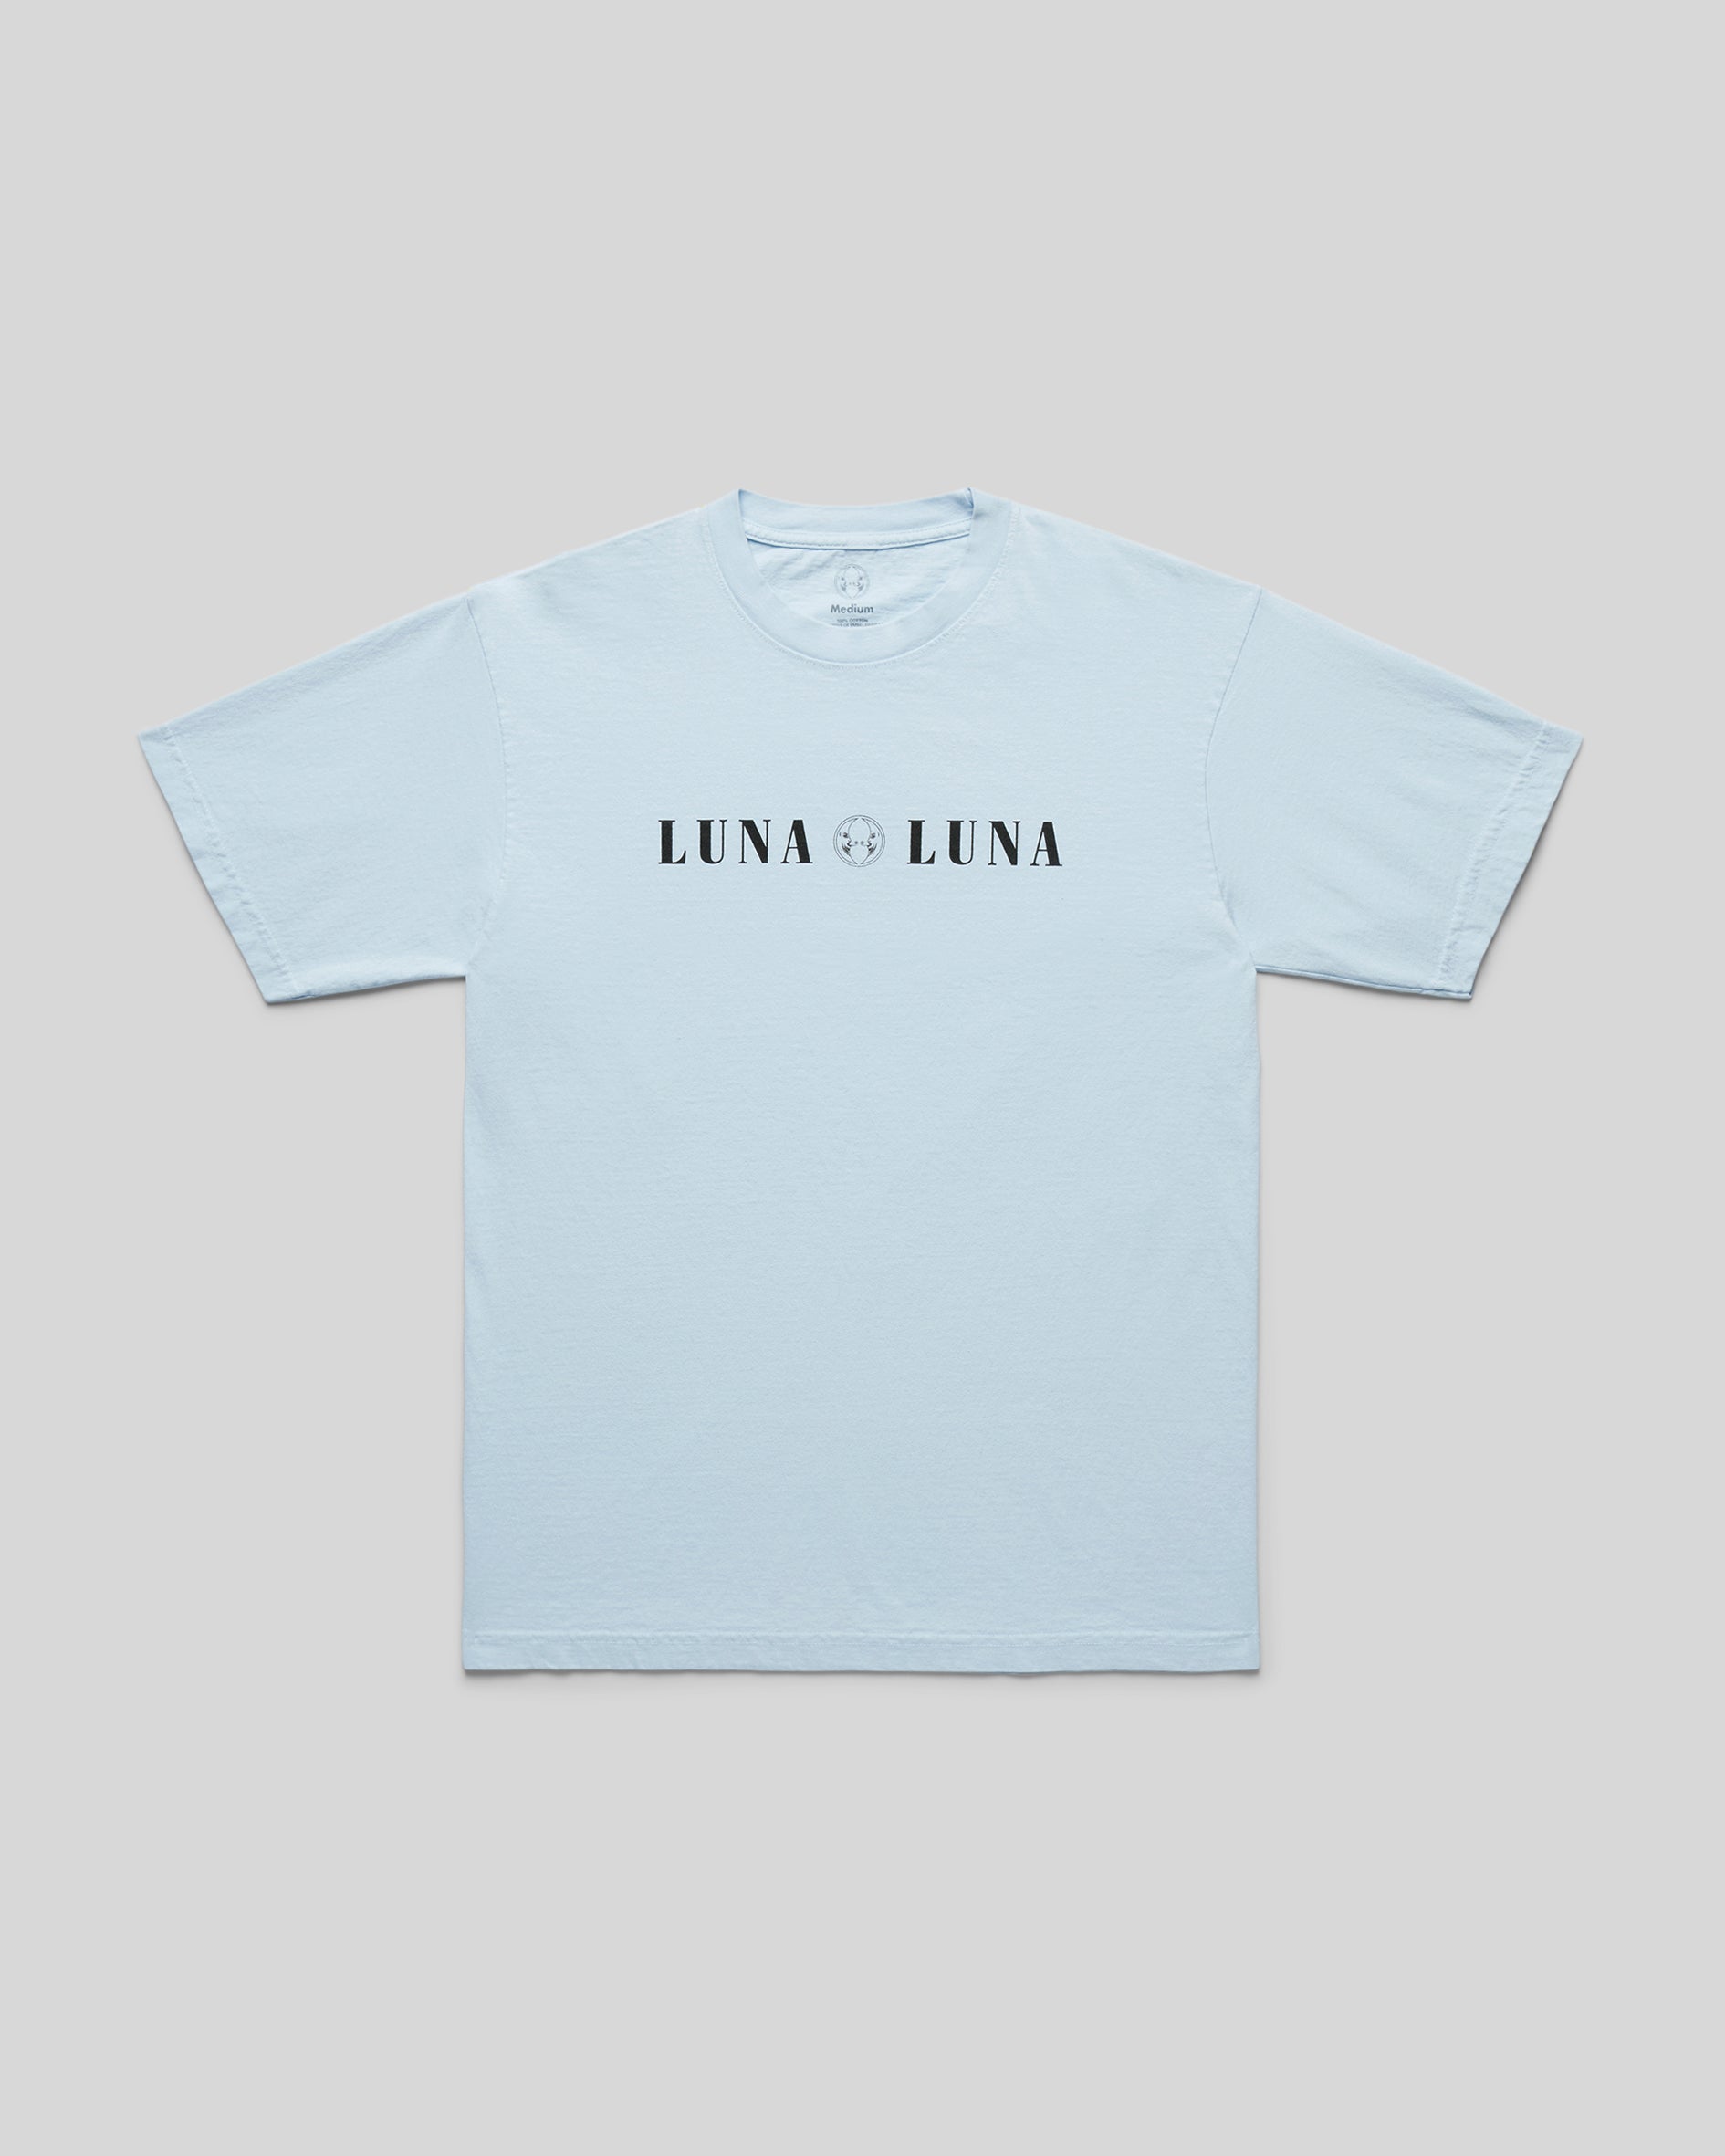 1987 Luna Luna T-Shirt in Baby Blue. Baby blue t-shirt with black text at chest that reads "LUNA LUNA"